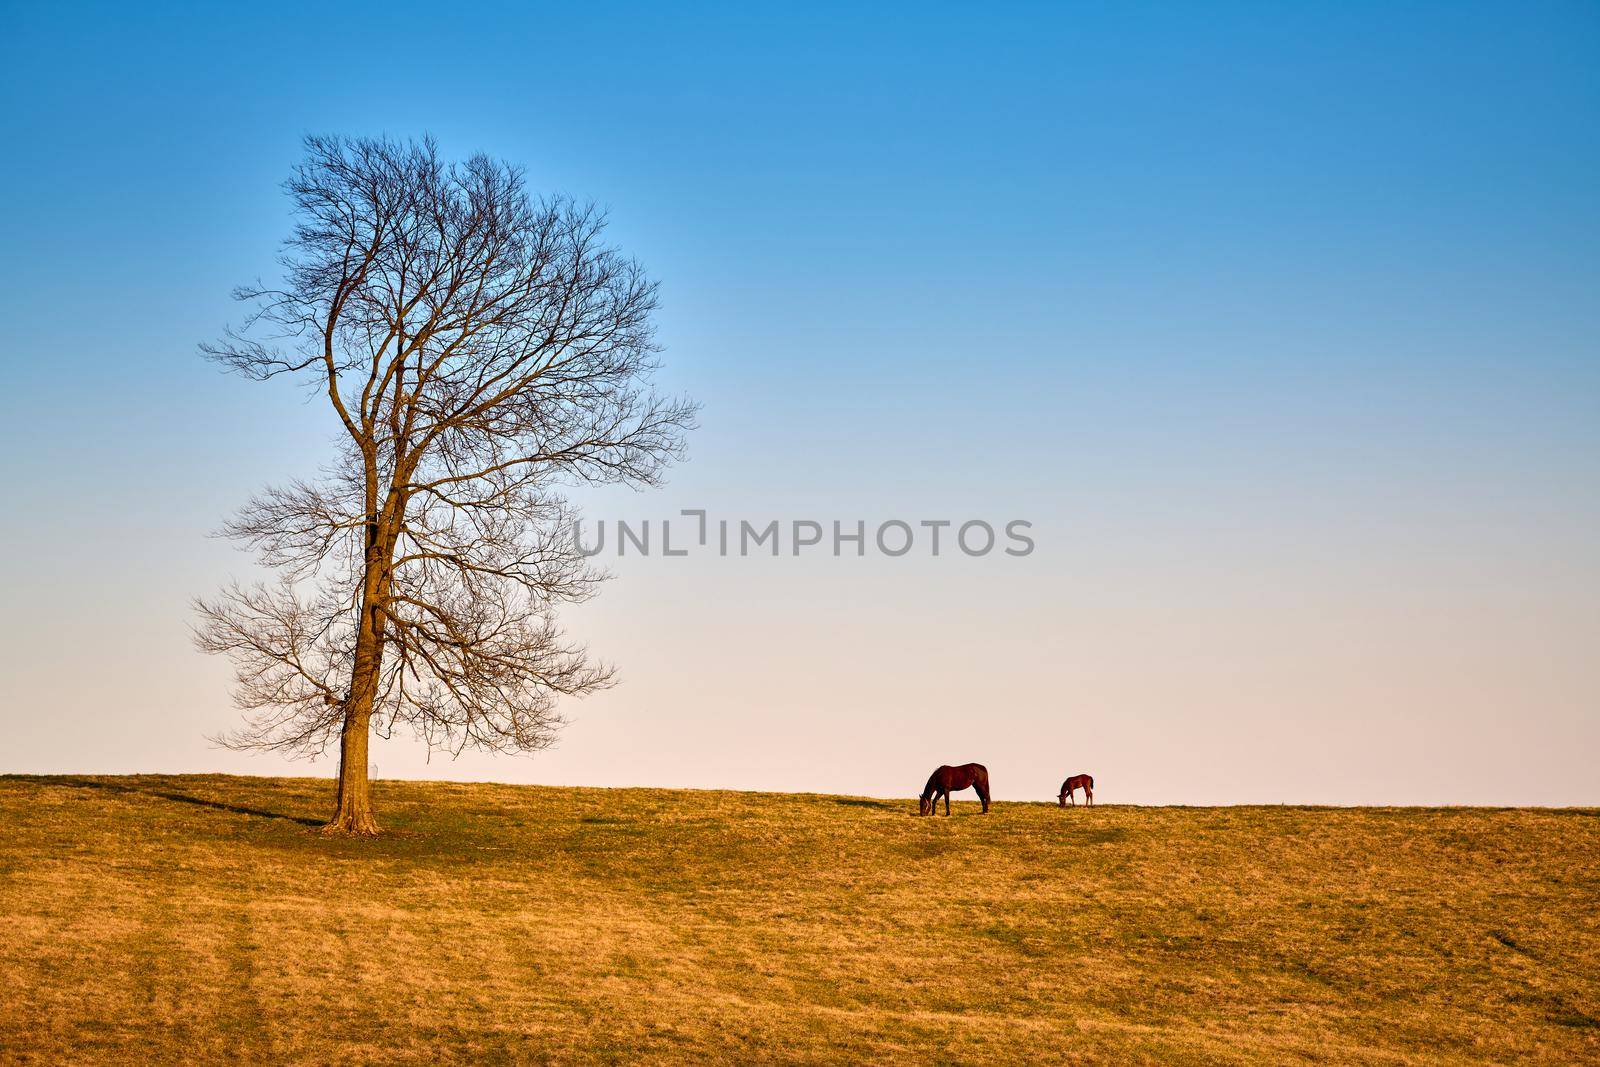 A mare and foal grazing on early spring grass.